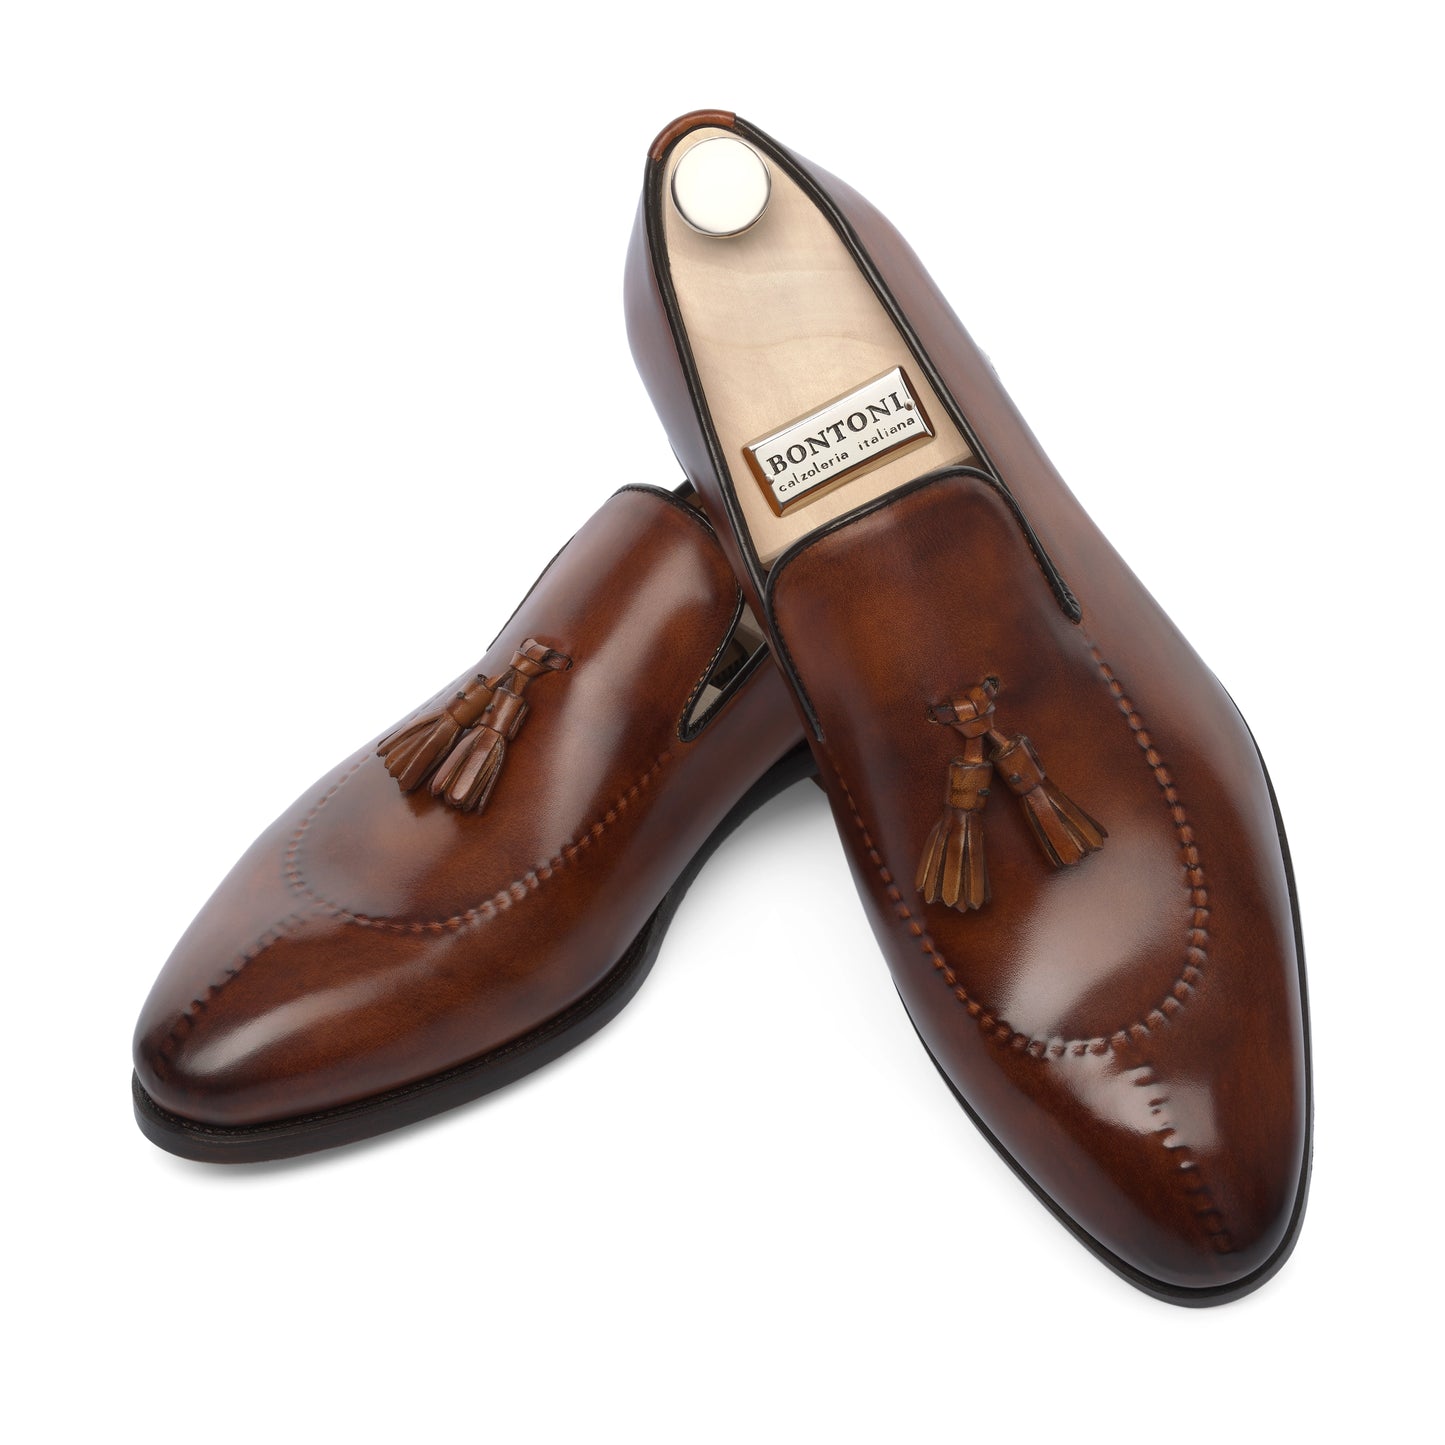 "Magnifico Reverse" Loafer with Tassels in Whisky